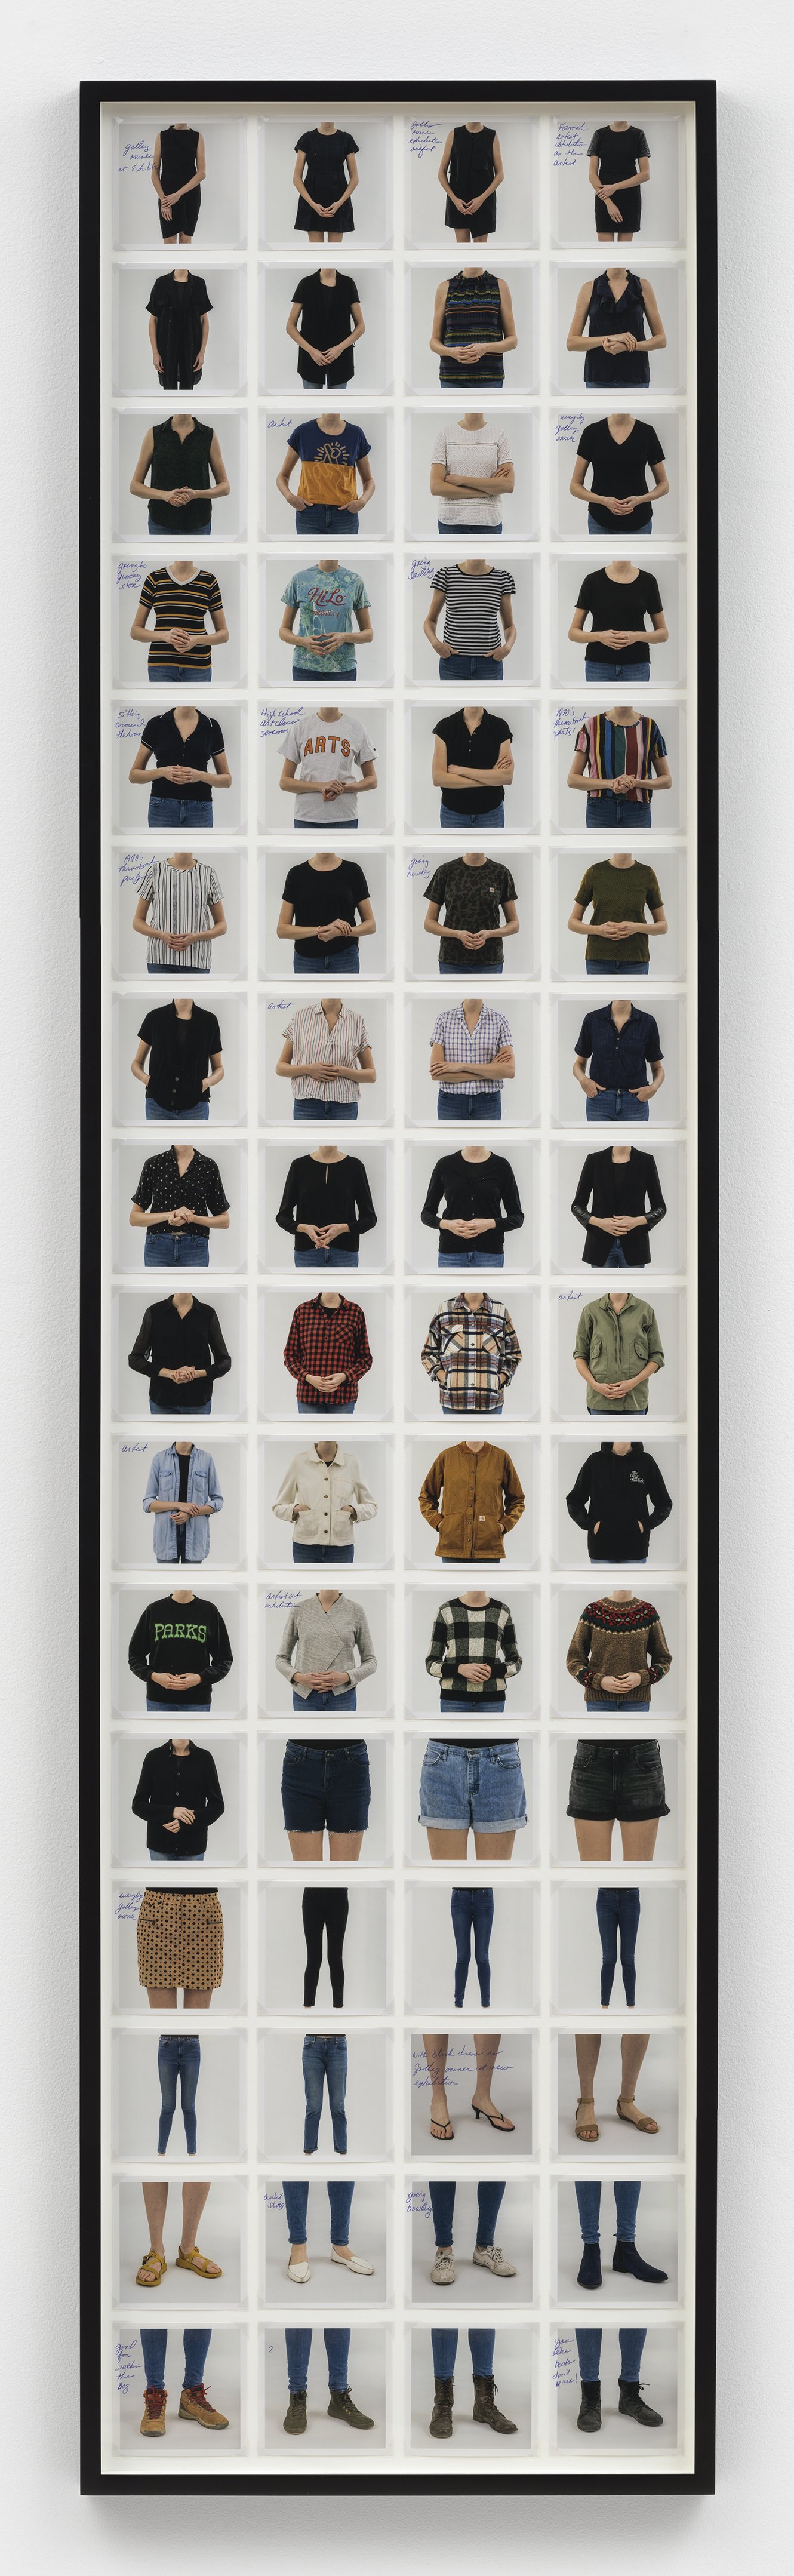   All My Clothes That Make Me Look Most Convincingly Like An Artist According to Robert K. Wittman, Former FBI Agent Undercover in the Art World , 2021 Annotated c-prints 78 1/2 x 20 inches&nbsp;     ABOUT UNDERCOVER   